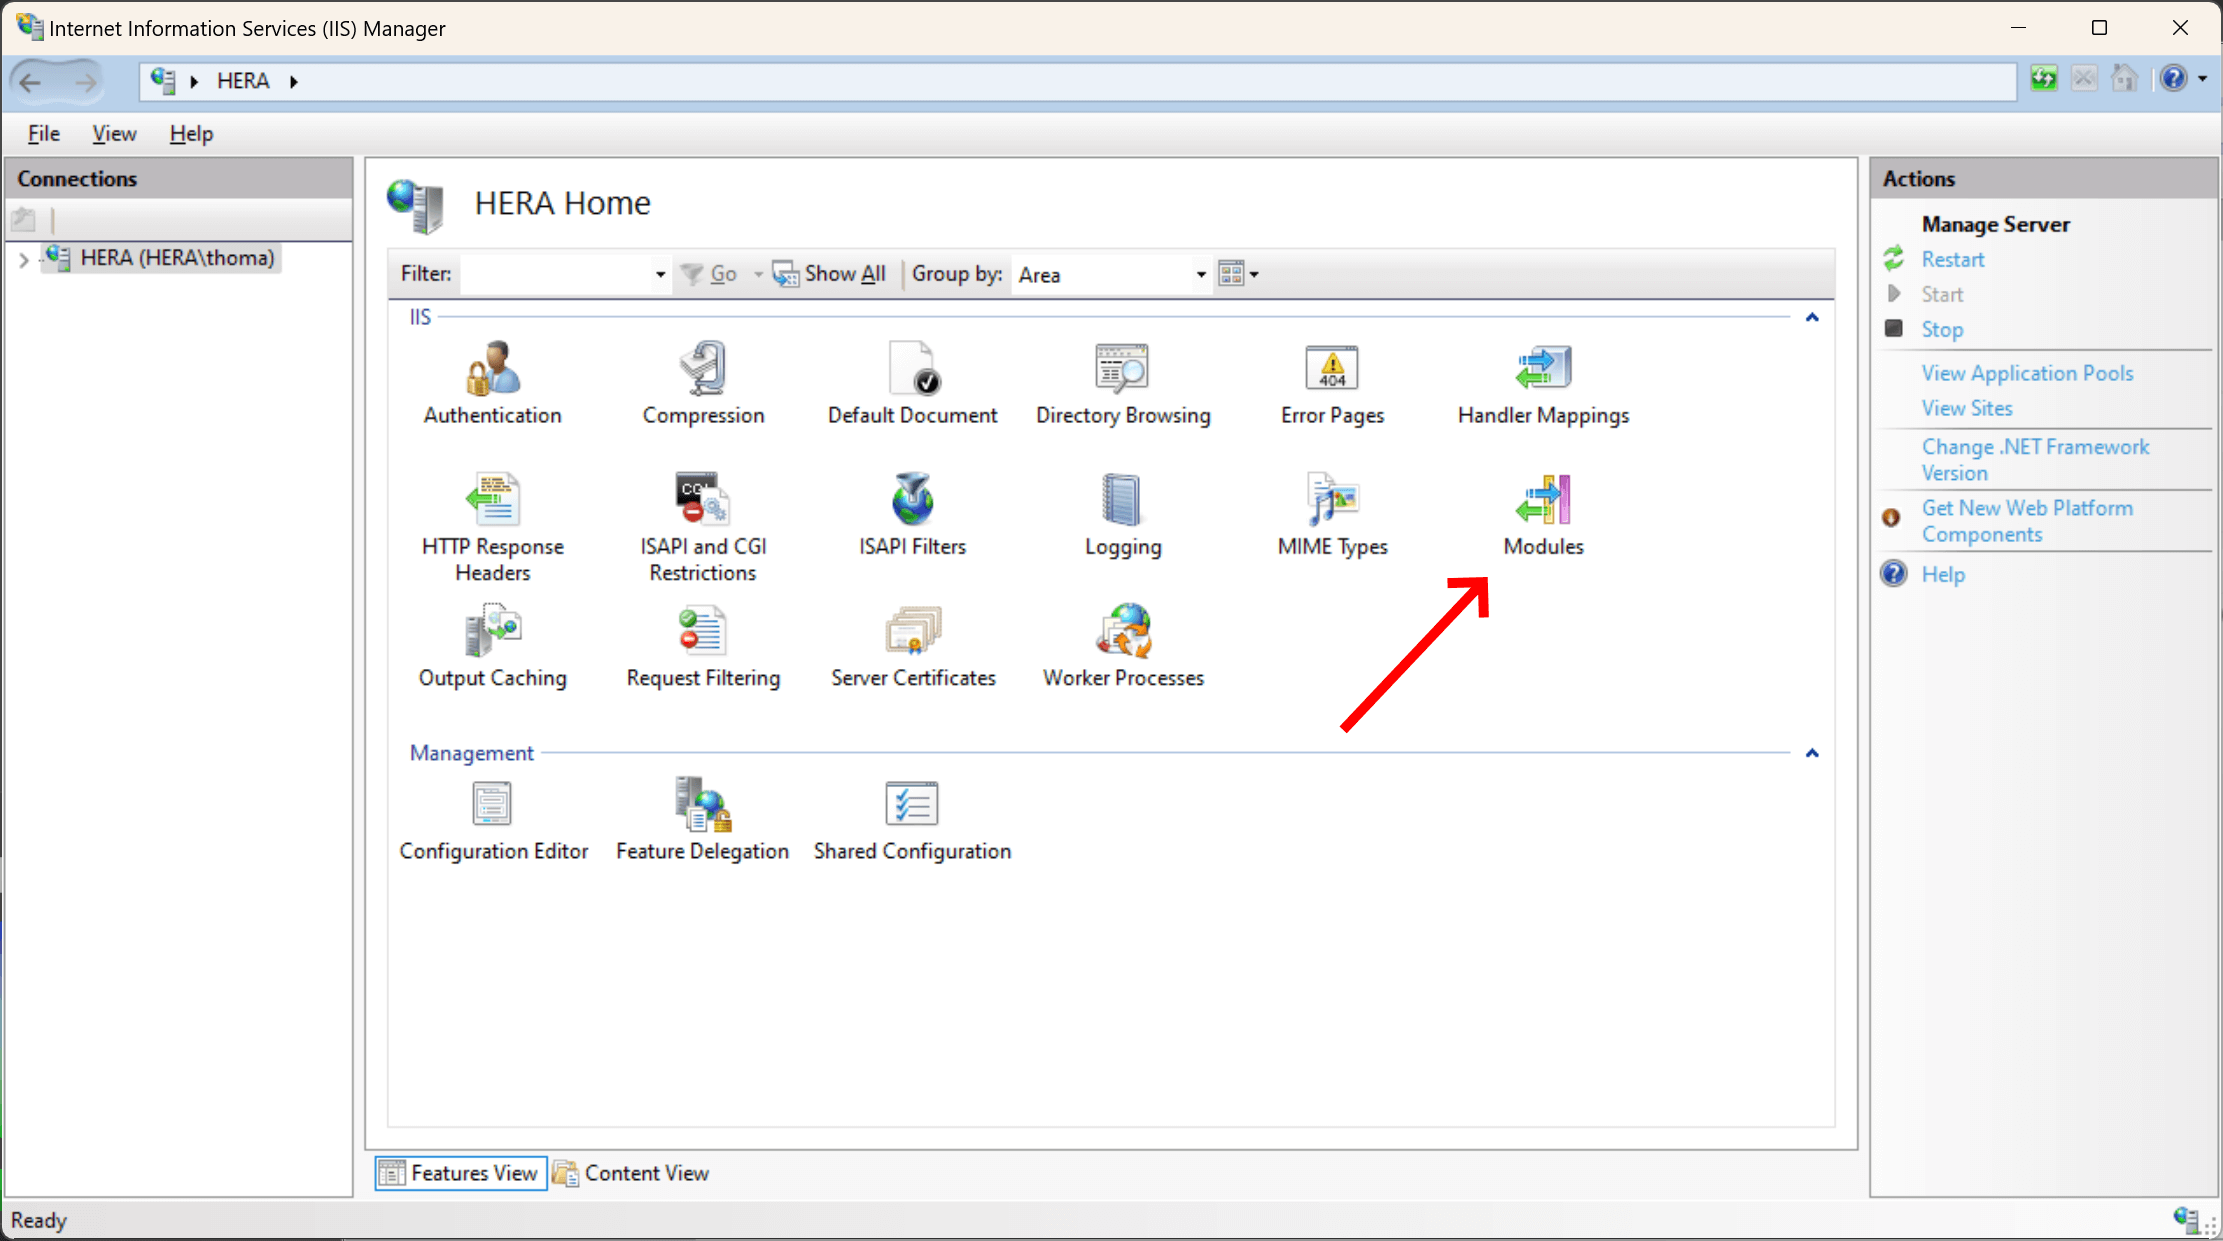 Modules in IIS Manager